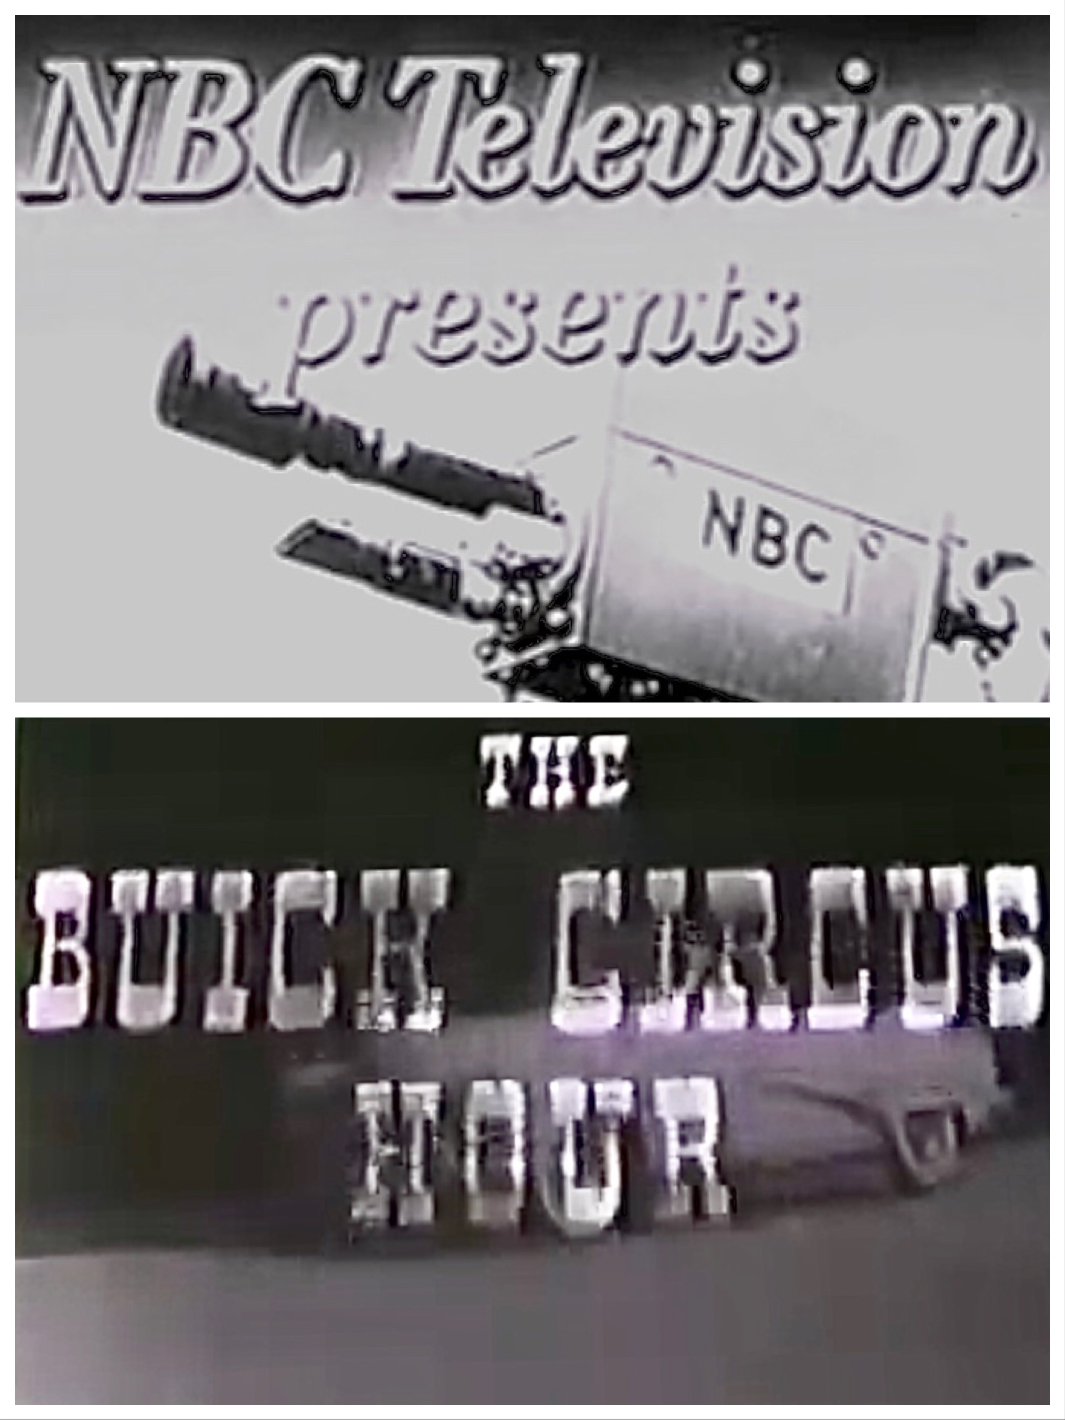 The Buick Circus Hour